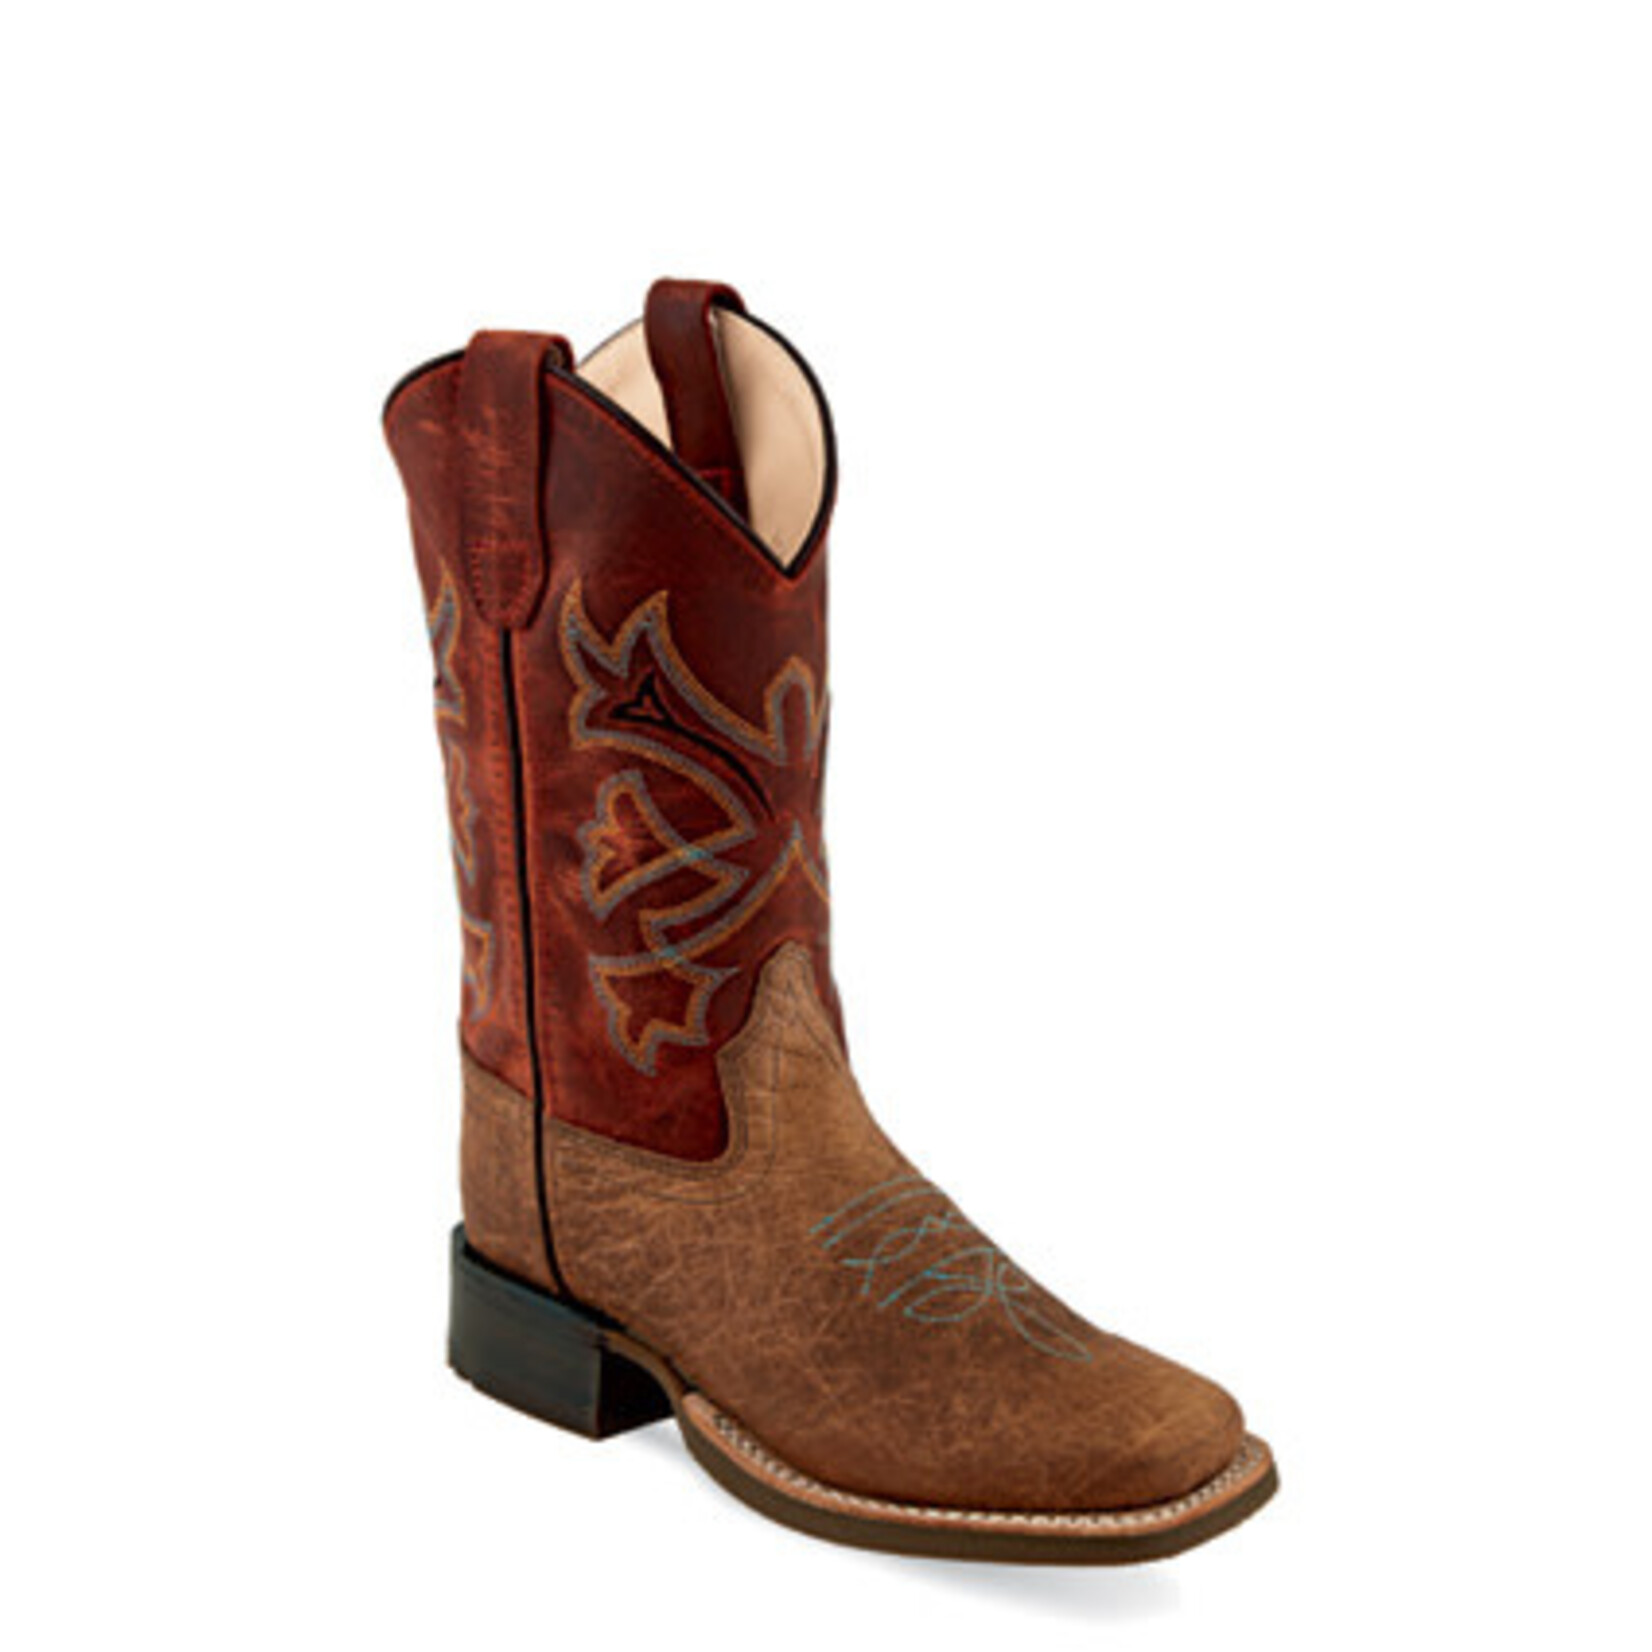 Old West Square Toed Welted Boot